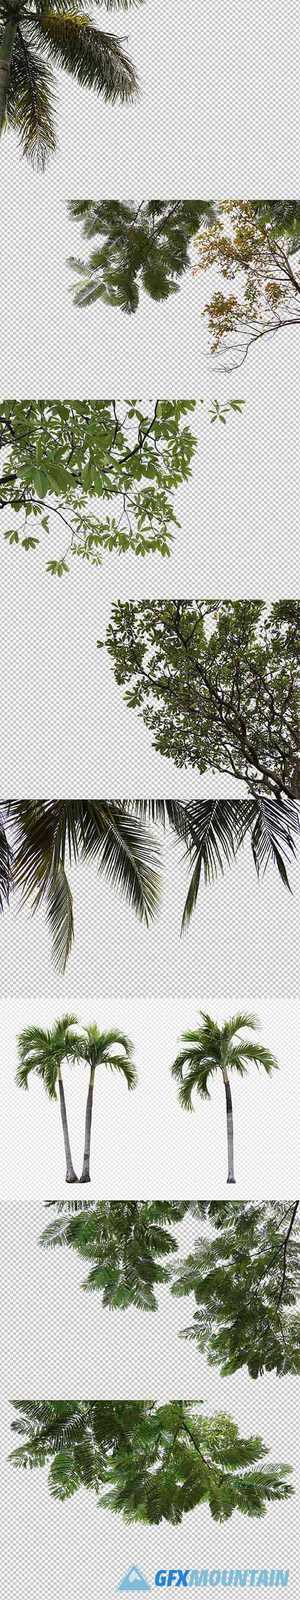 Tropical tree leaves and branch foreground